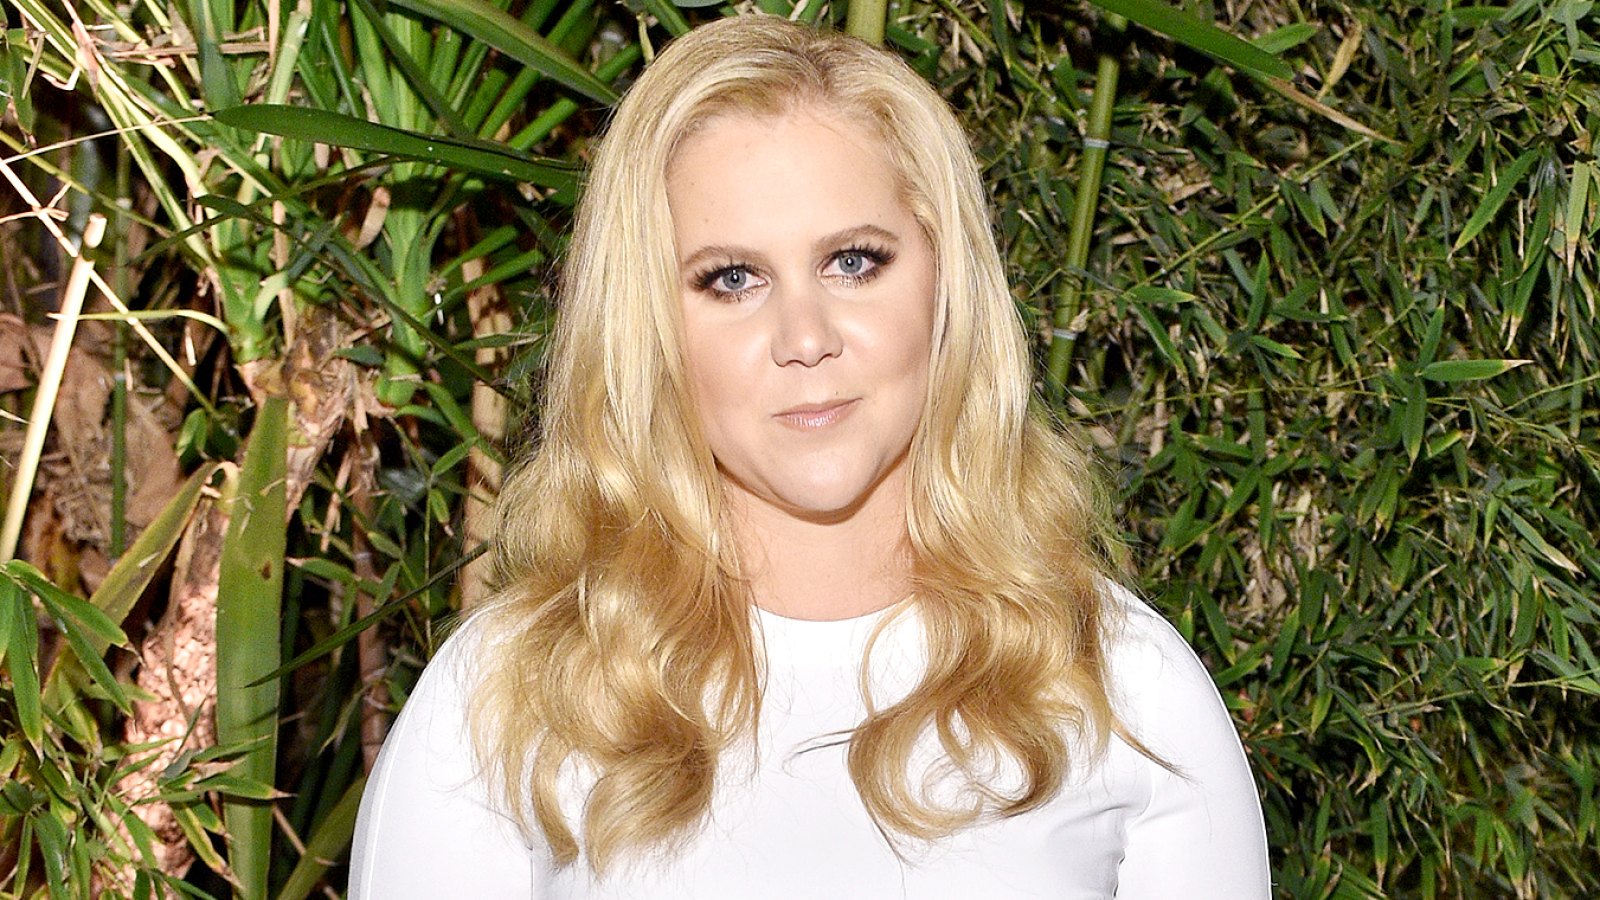 Amy Schumer attends the GQ 20th Anniversary Men of the Year Party at Chateau Marmont on December 3, 2015 in Los Angeles, California.